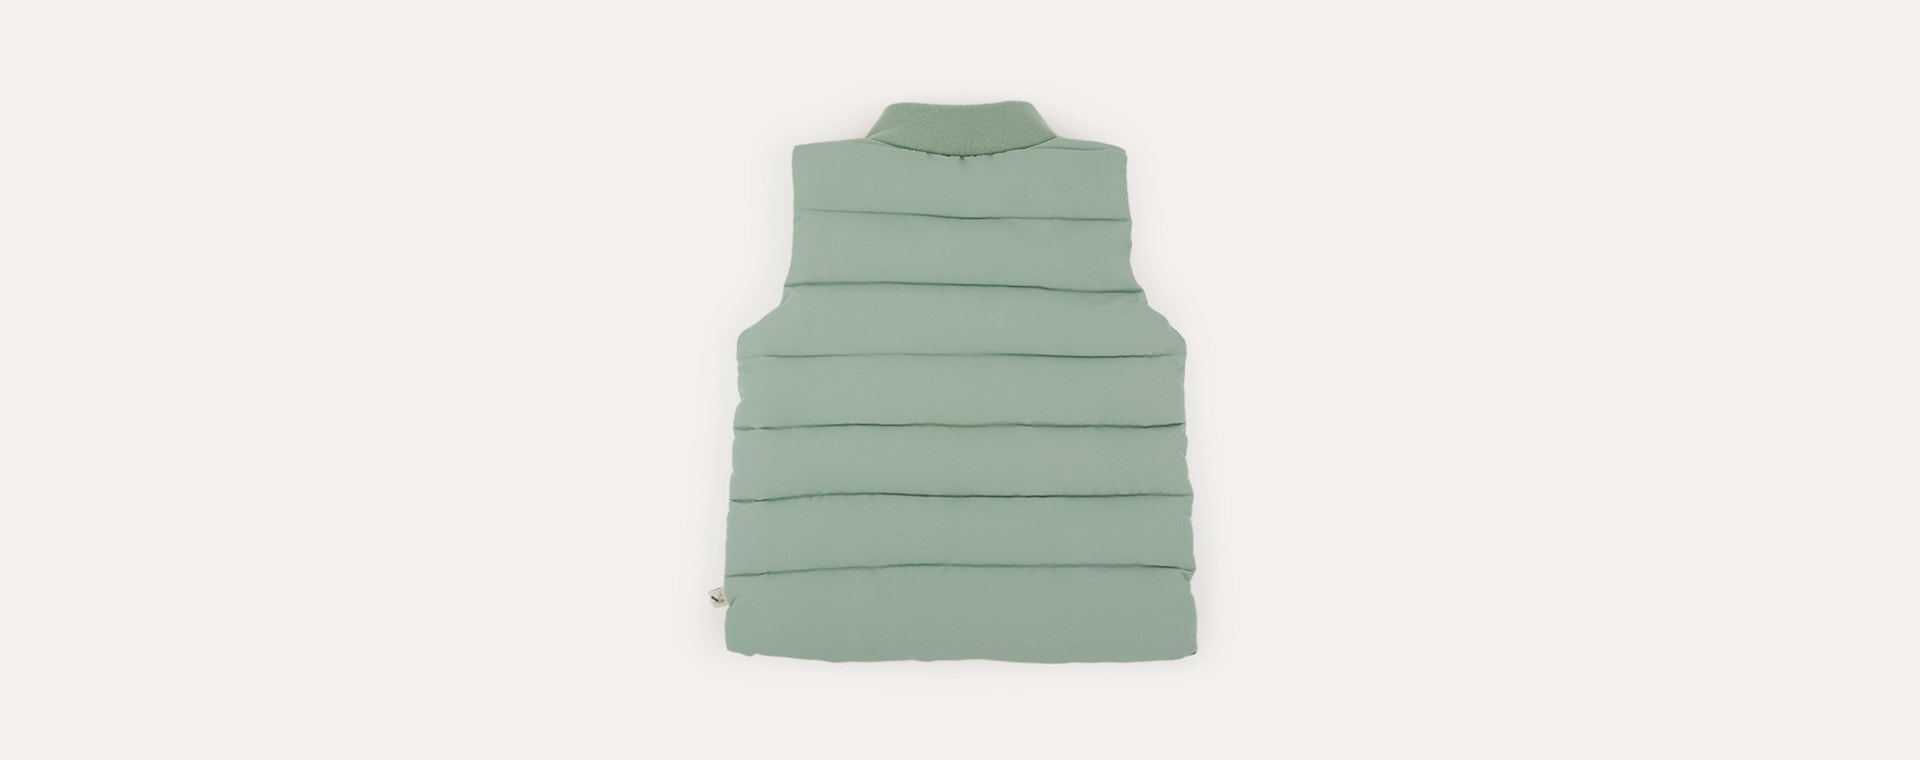 Sage KIDLY Label Recycled Padded Gilet